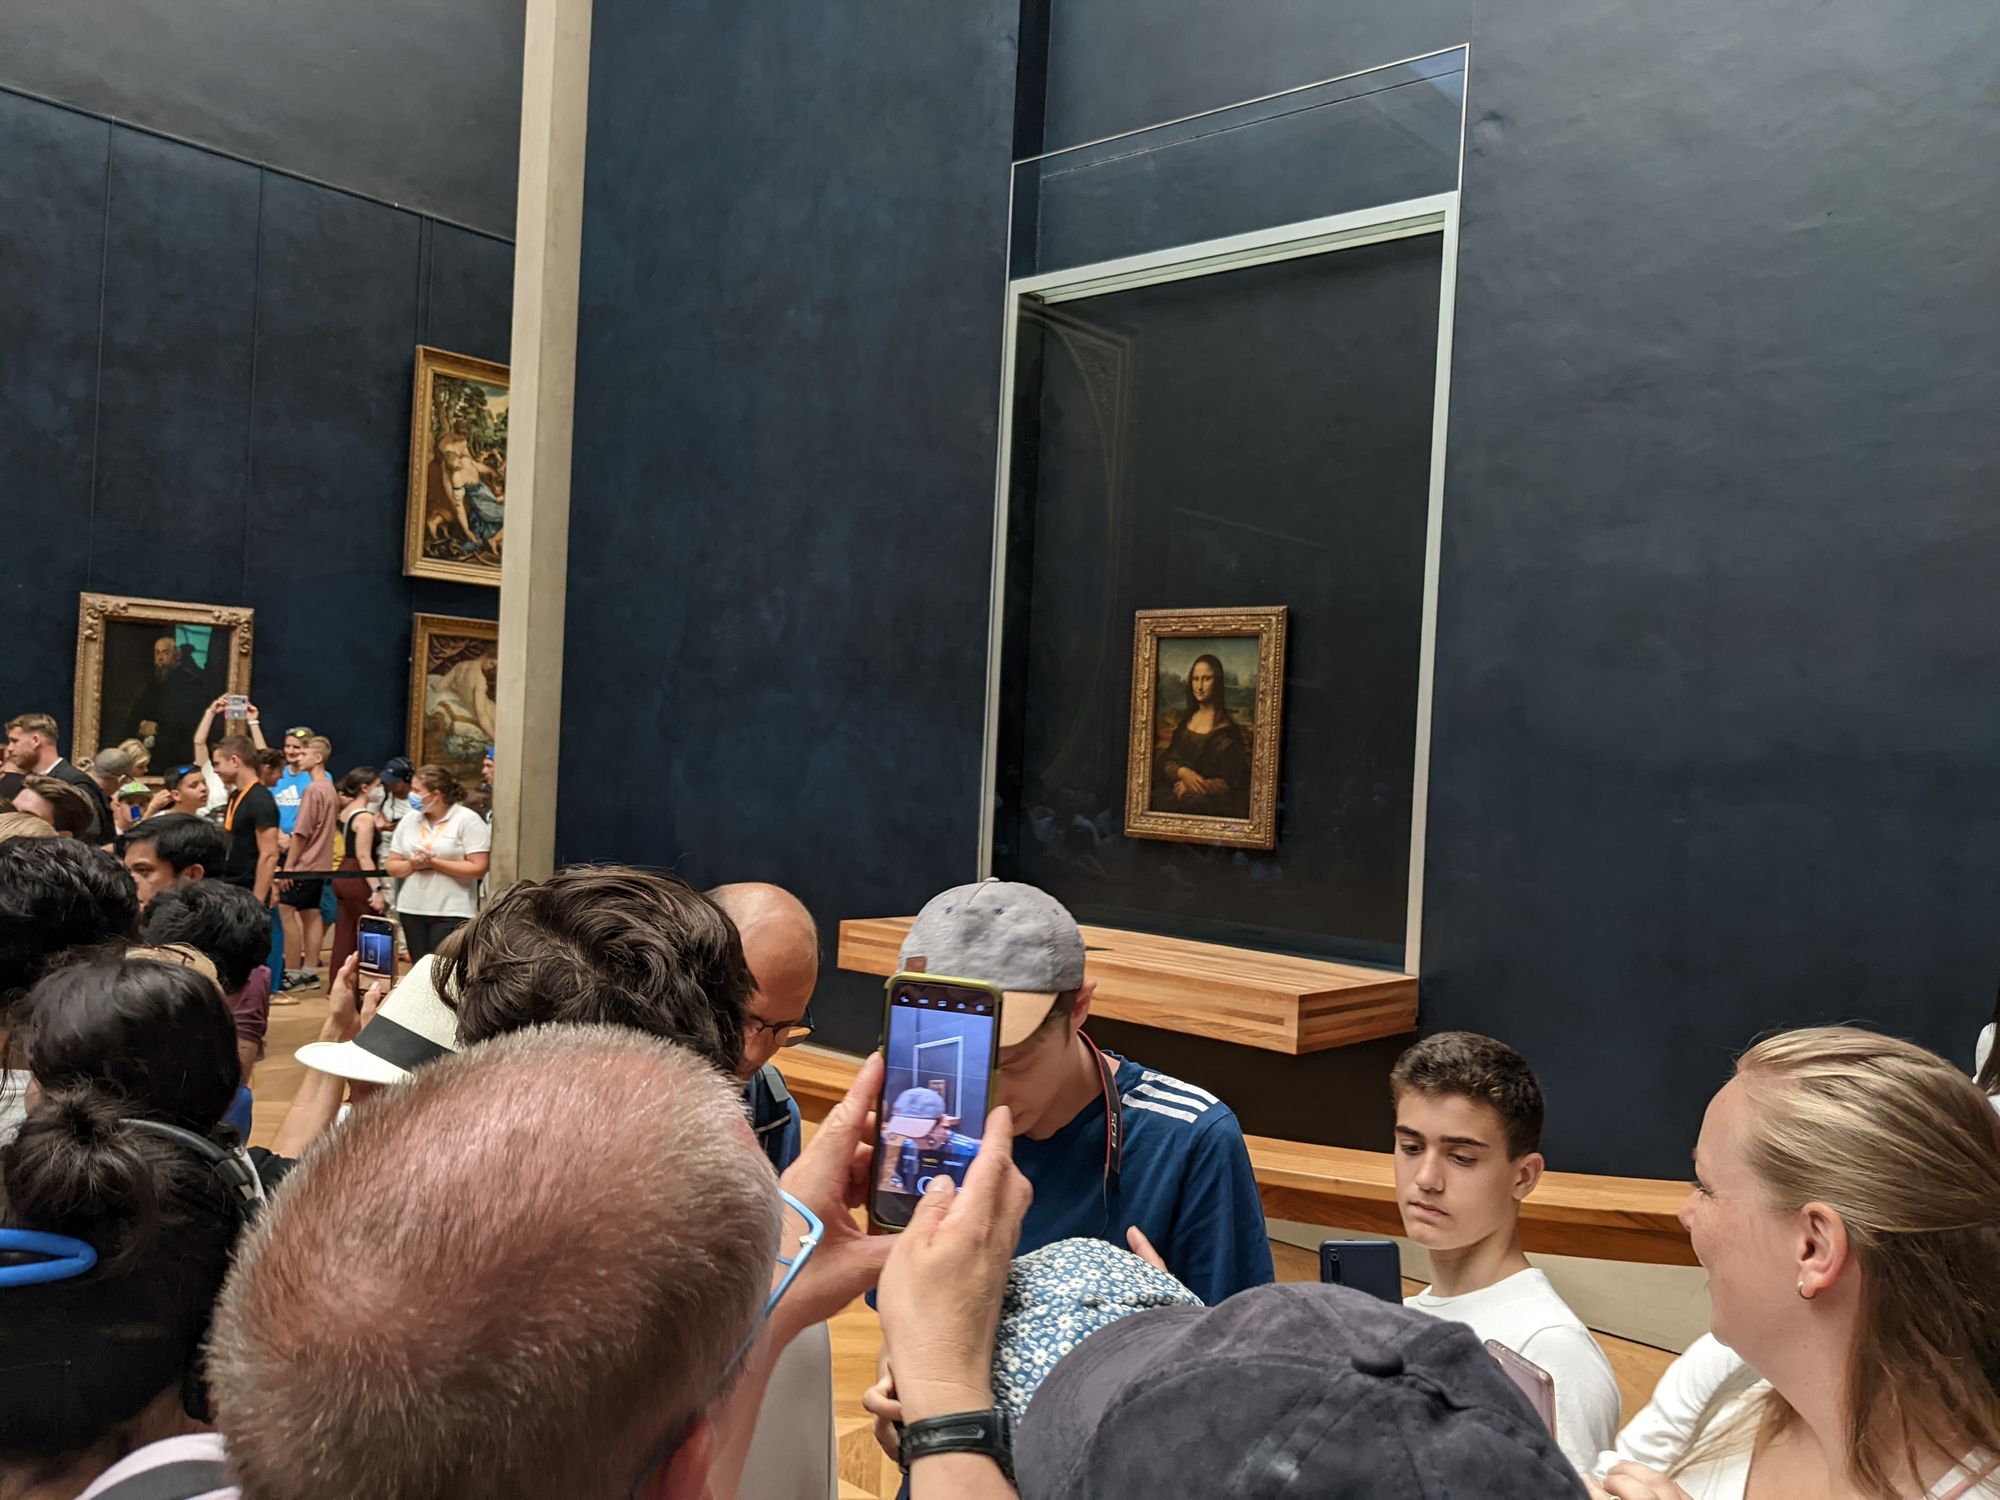 The Mona Lisa at the Louvre Museum in Paris in July 2022